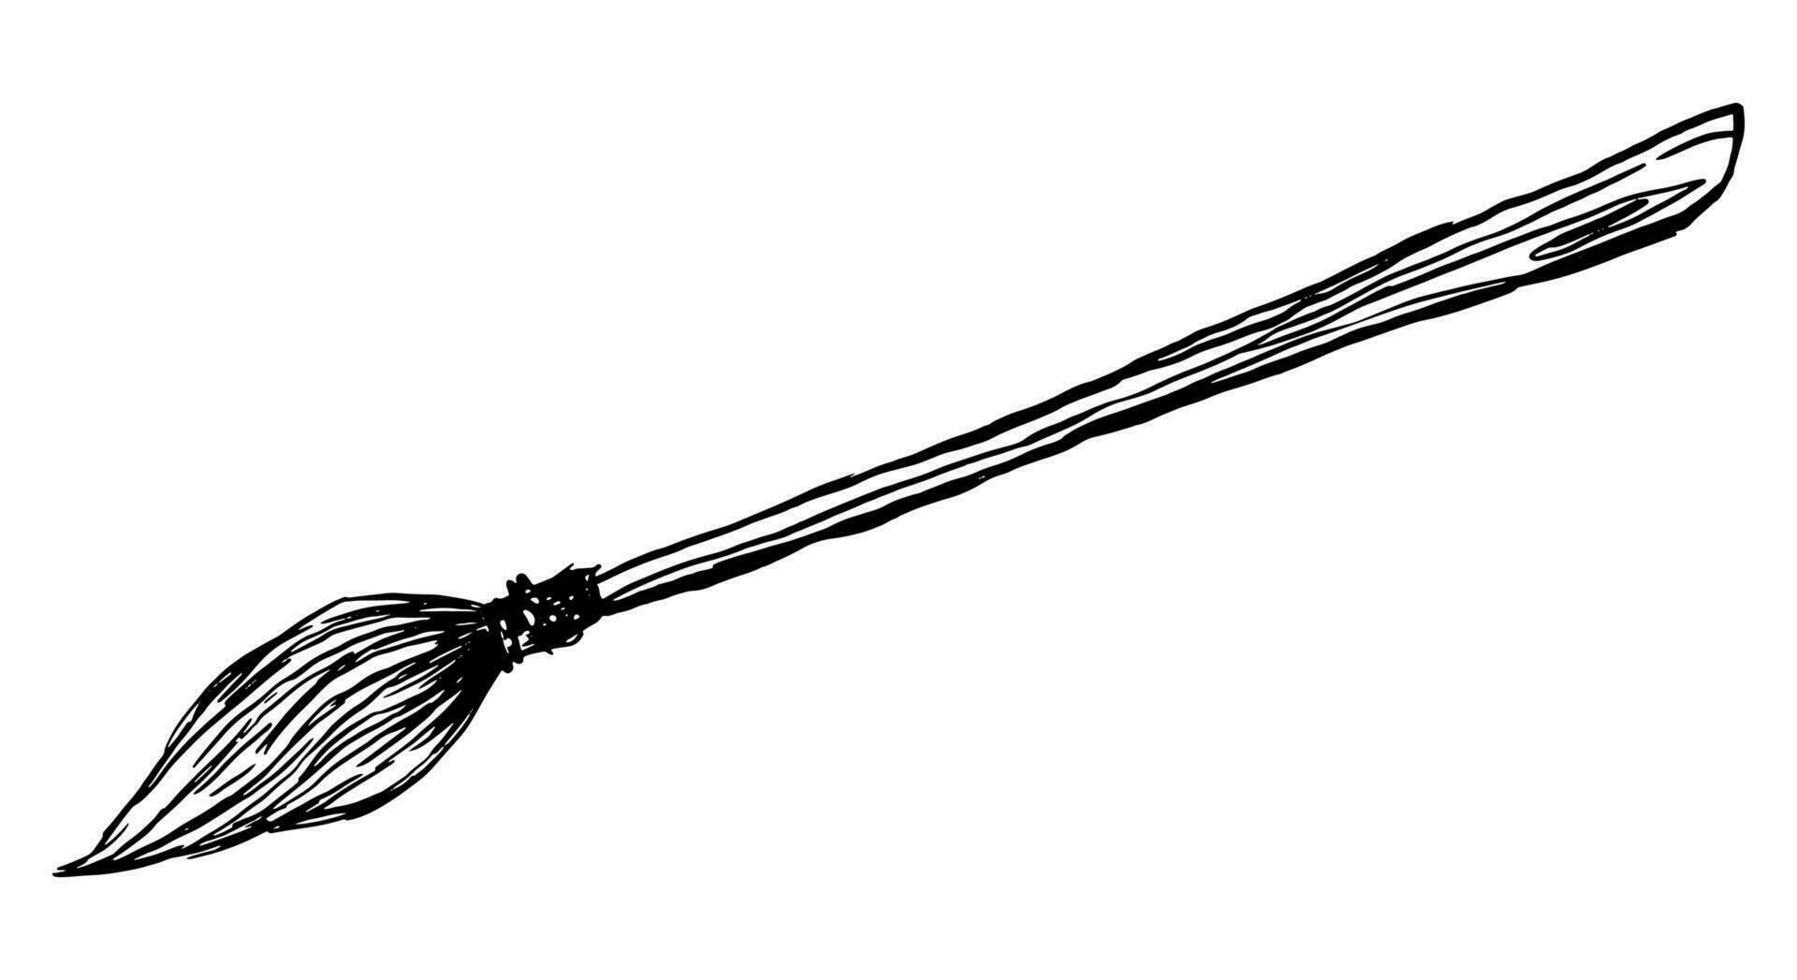 Old broomstick doodle. Household, magic broom ink sketch isolated on white. Halloween hand drawn vector illustration in retro style.